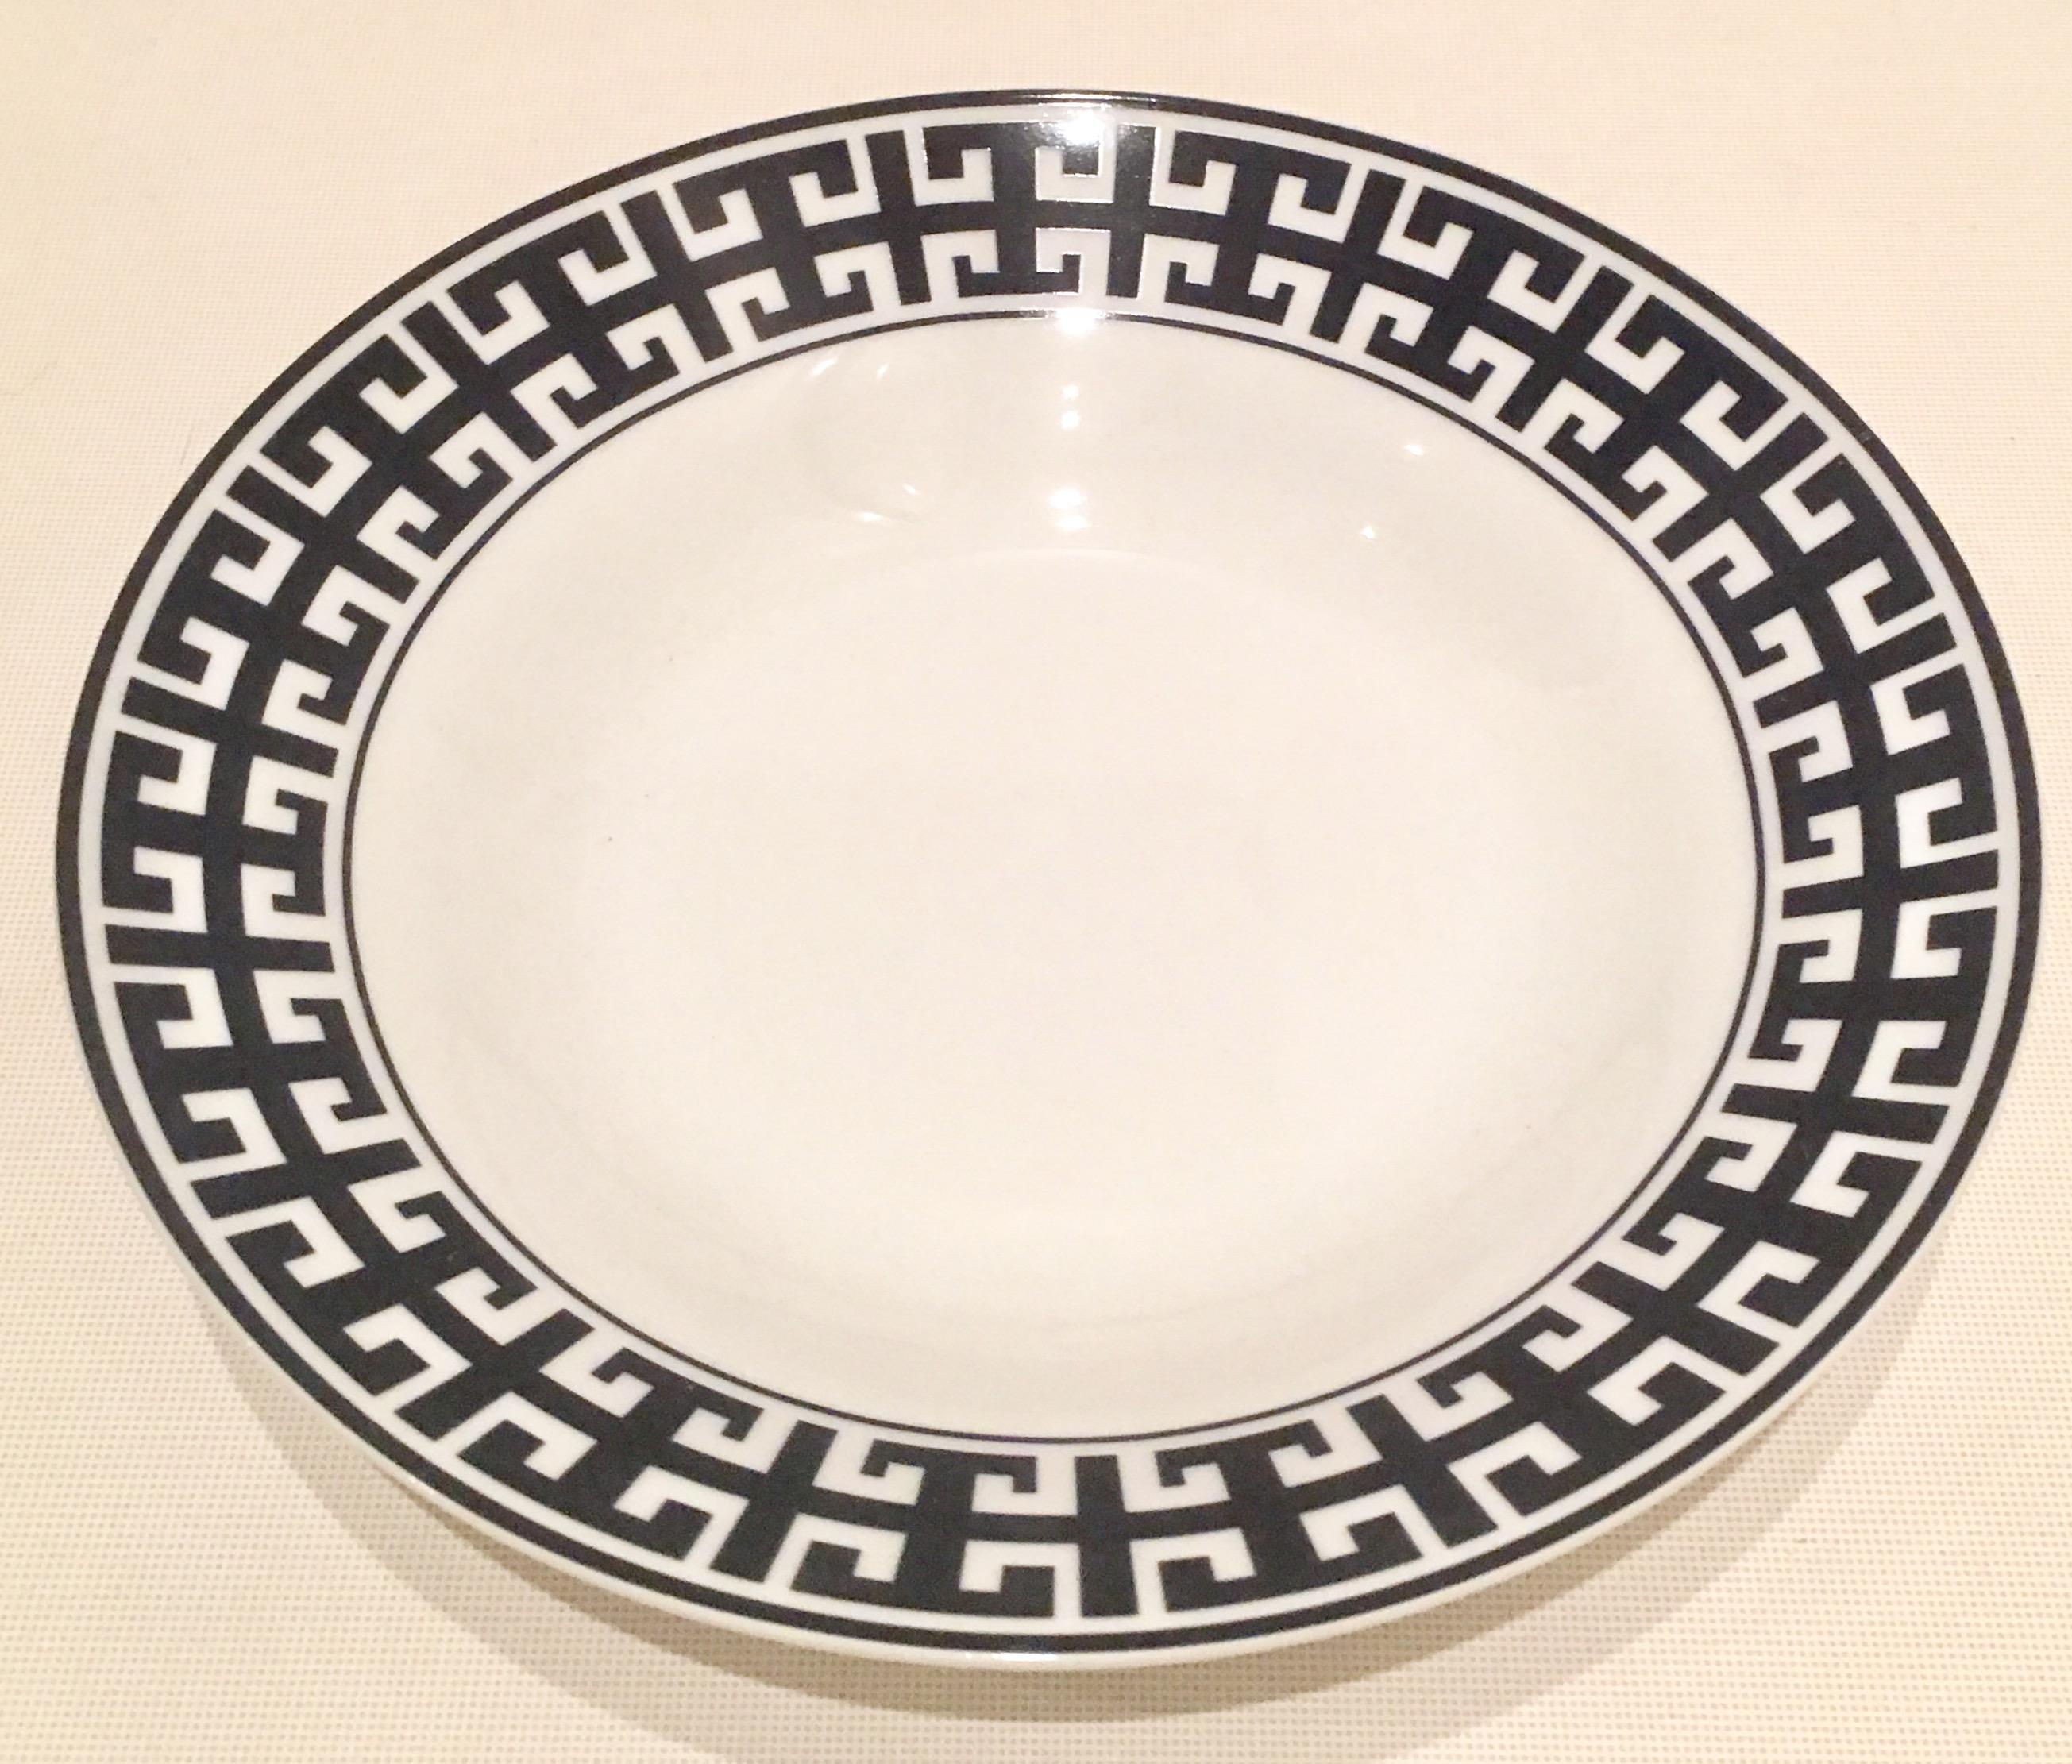 Chinese Contemporary & Modern Ceramic Dinnerware S/23 By Colin Cowie